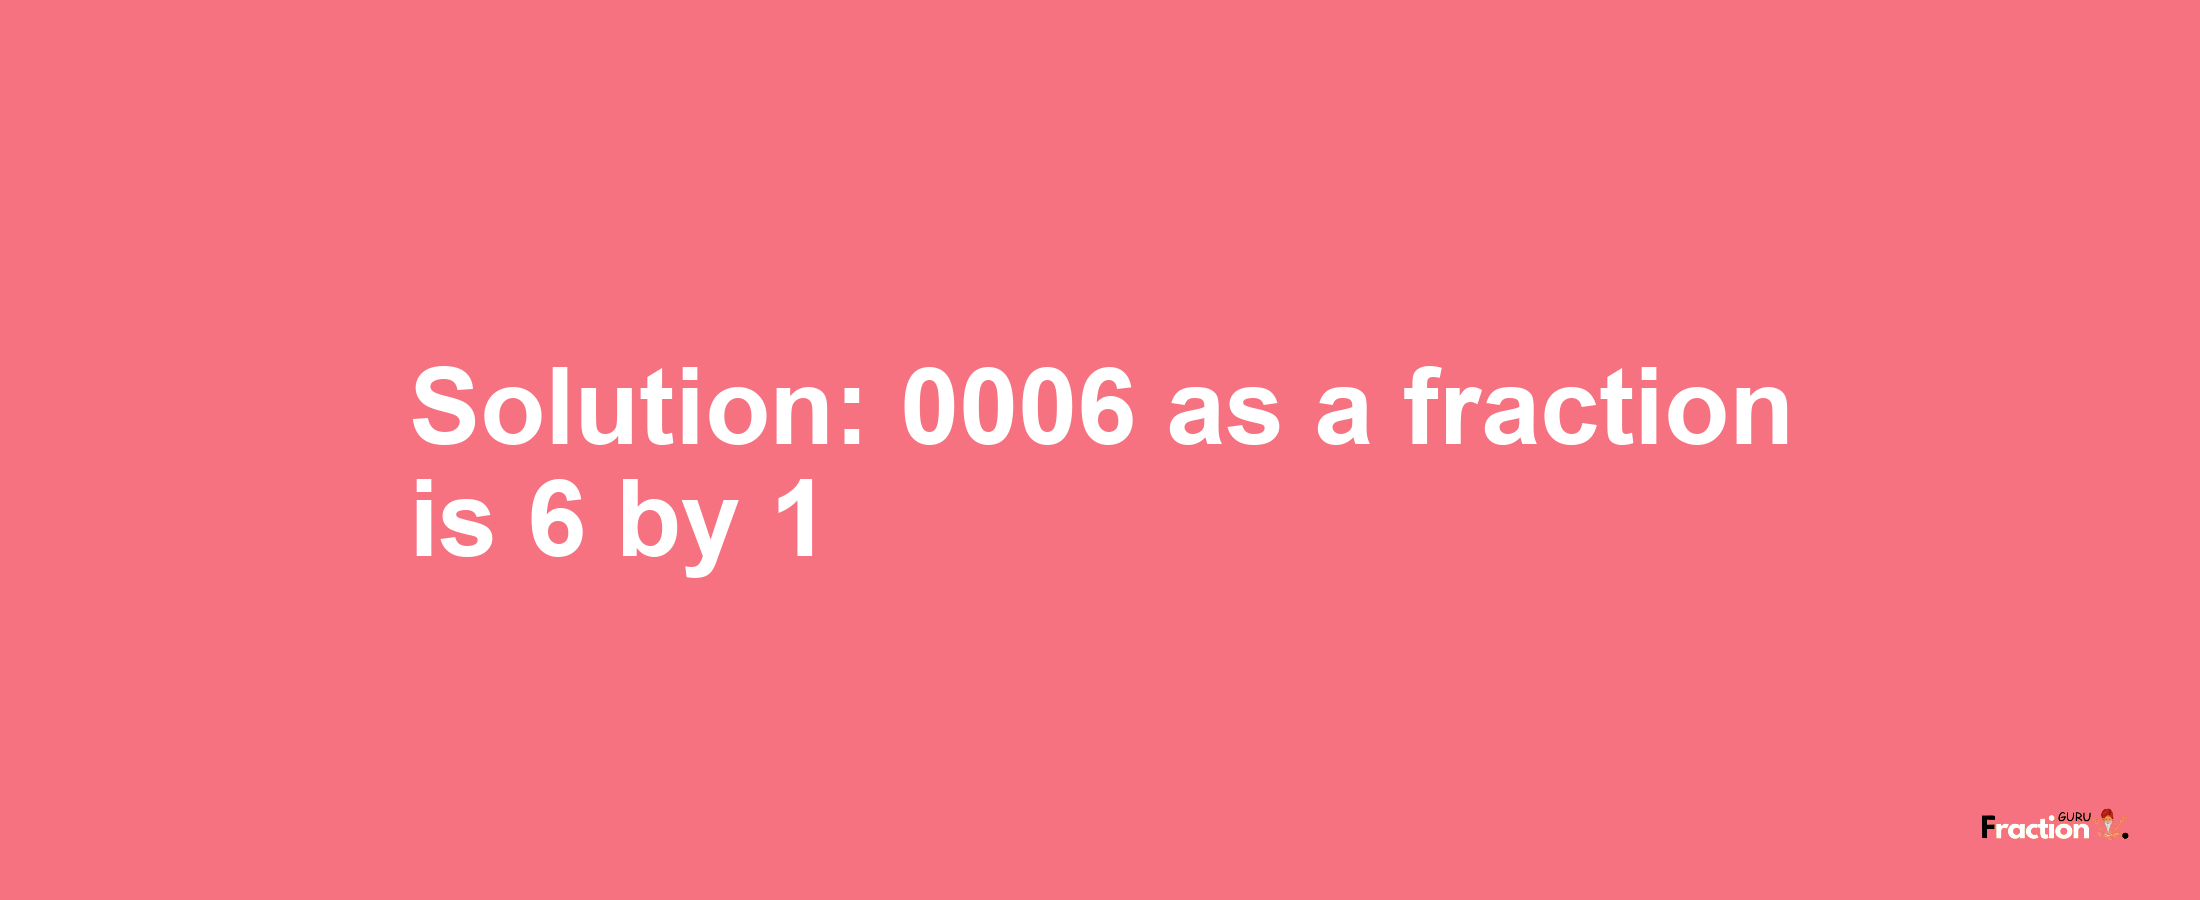 Solution:0006 as a fraction is 6/1